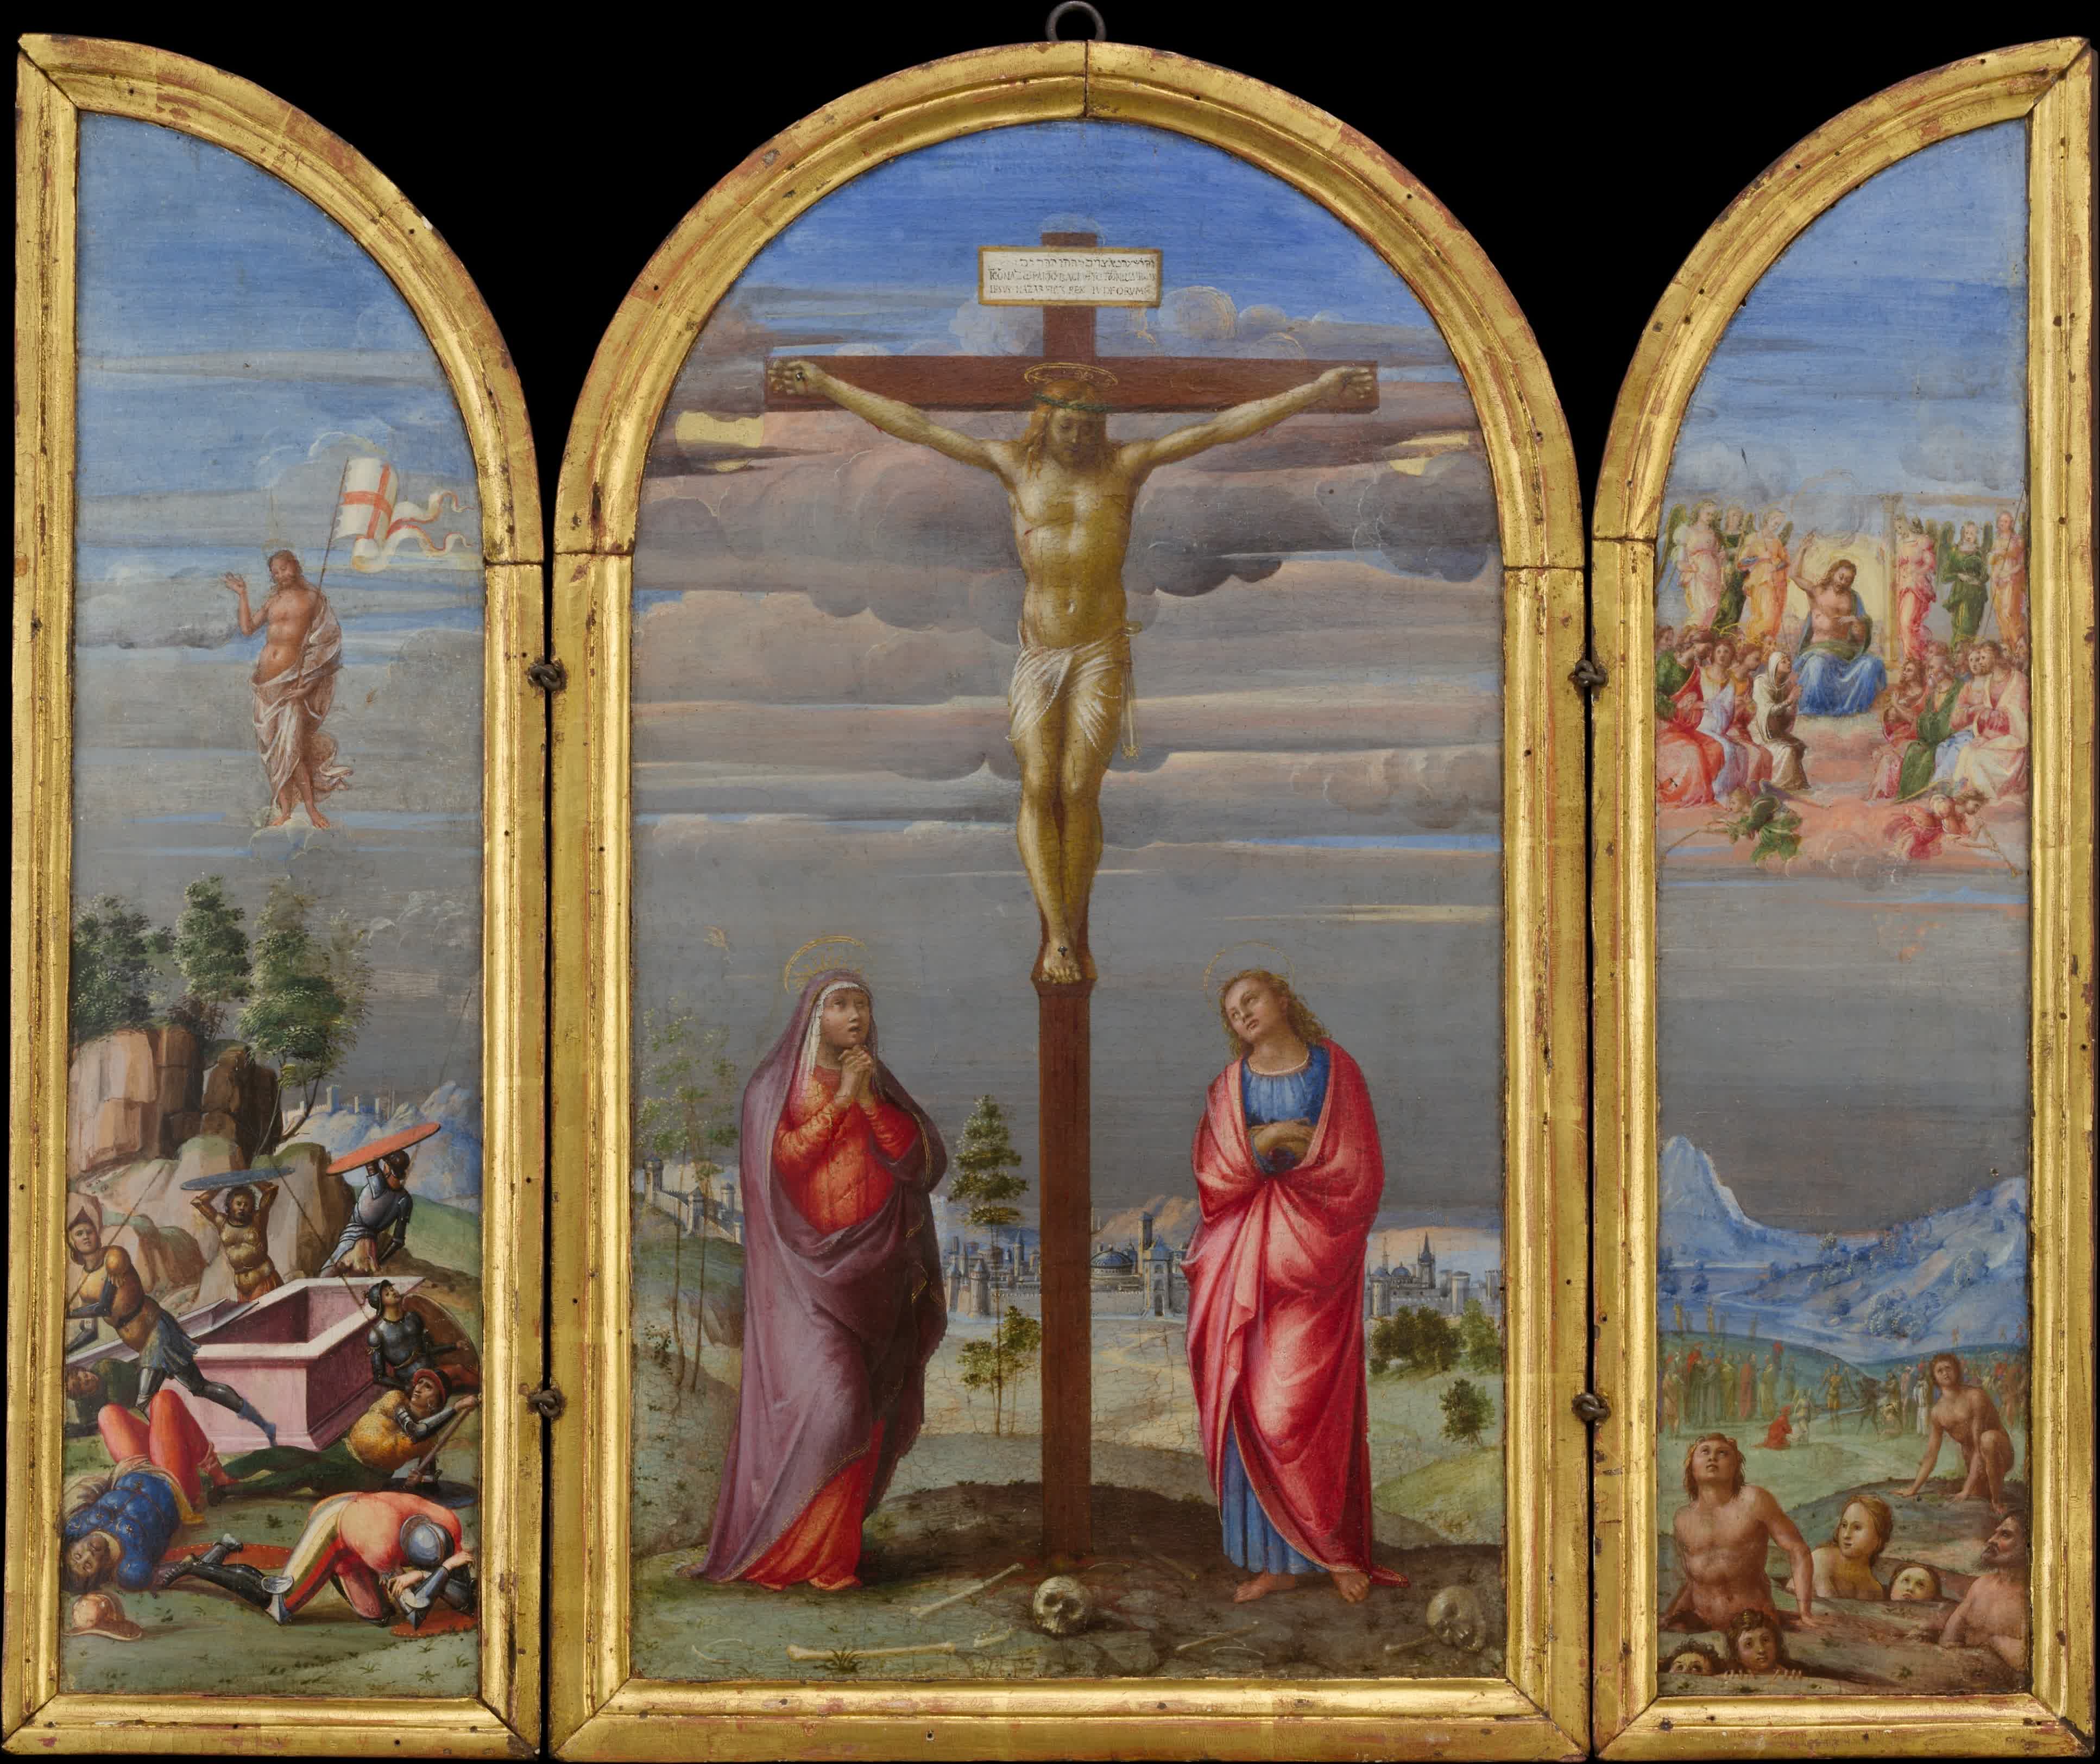 The Crucifixion of our Lord Jesus Christ, by Francesco Granacci.